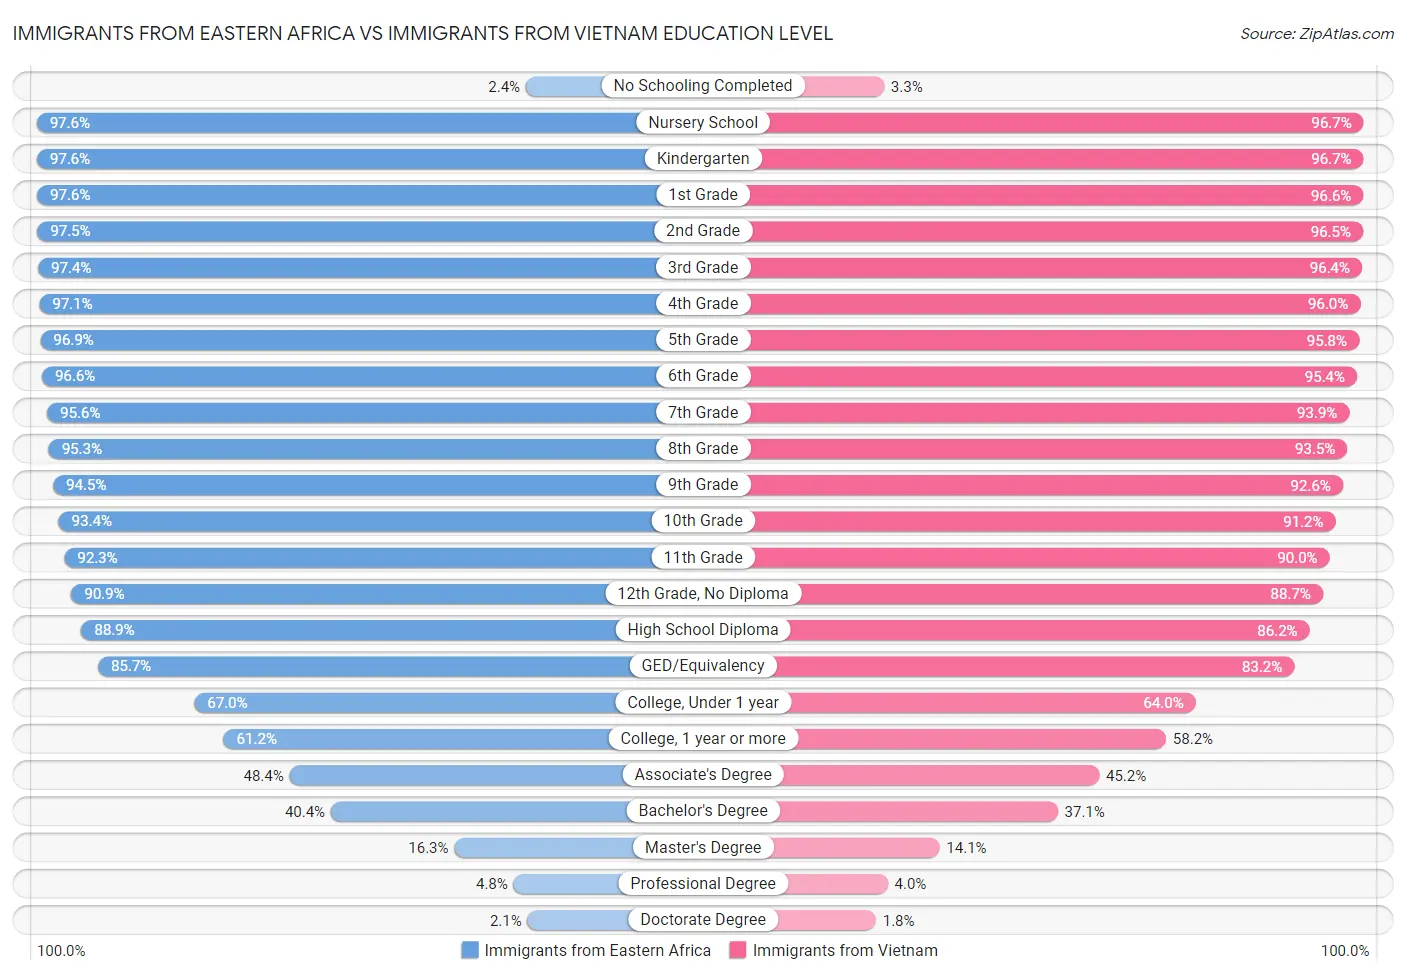 Immigrants from Eastern Africa vs Immigrants from Vietnam Education Level